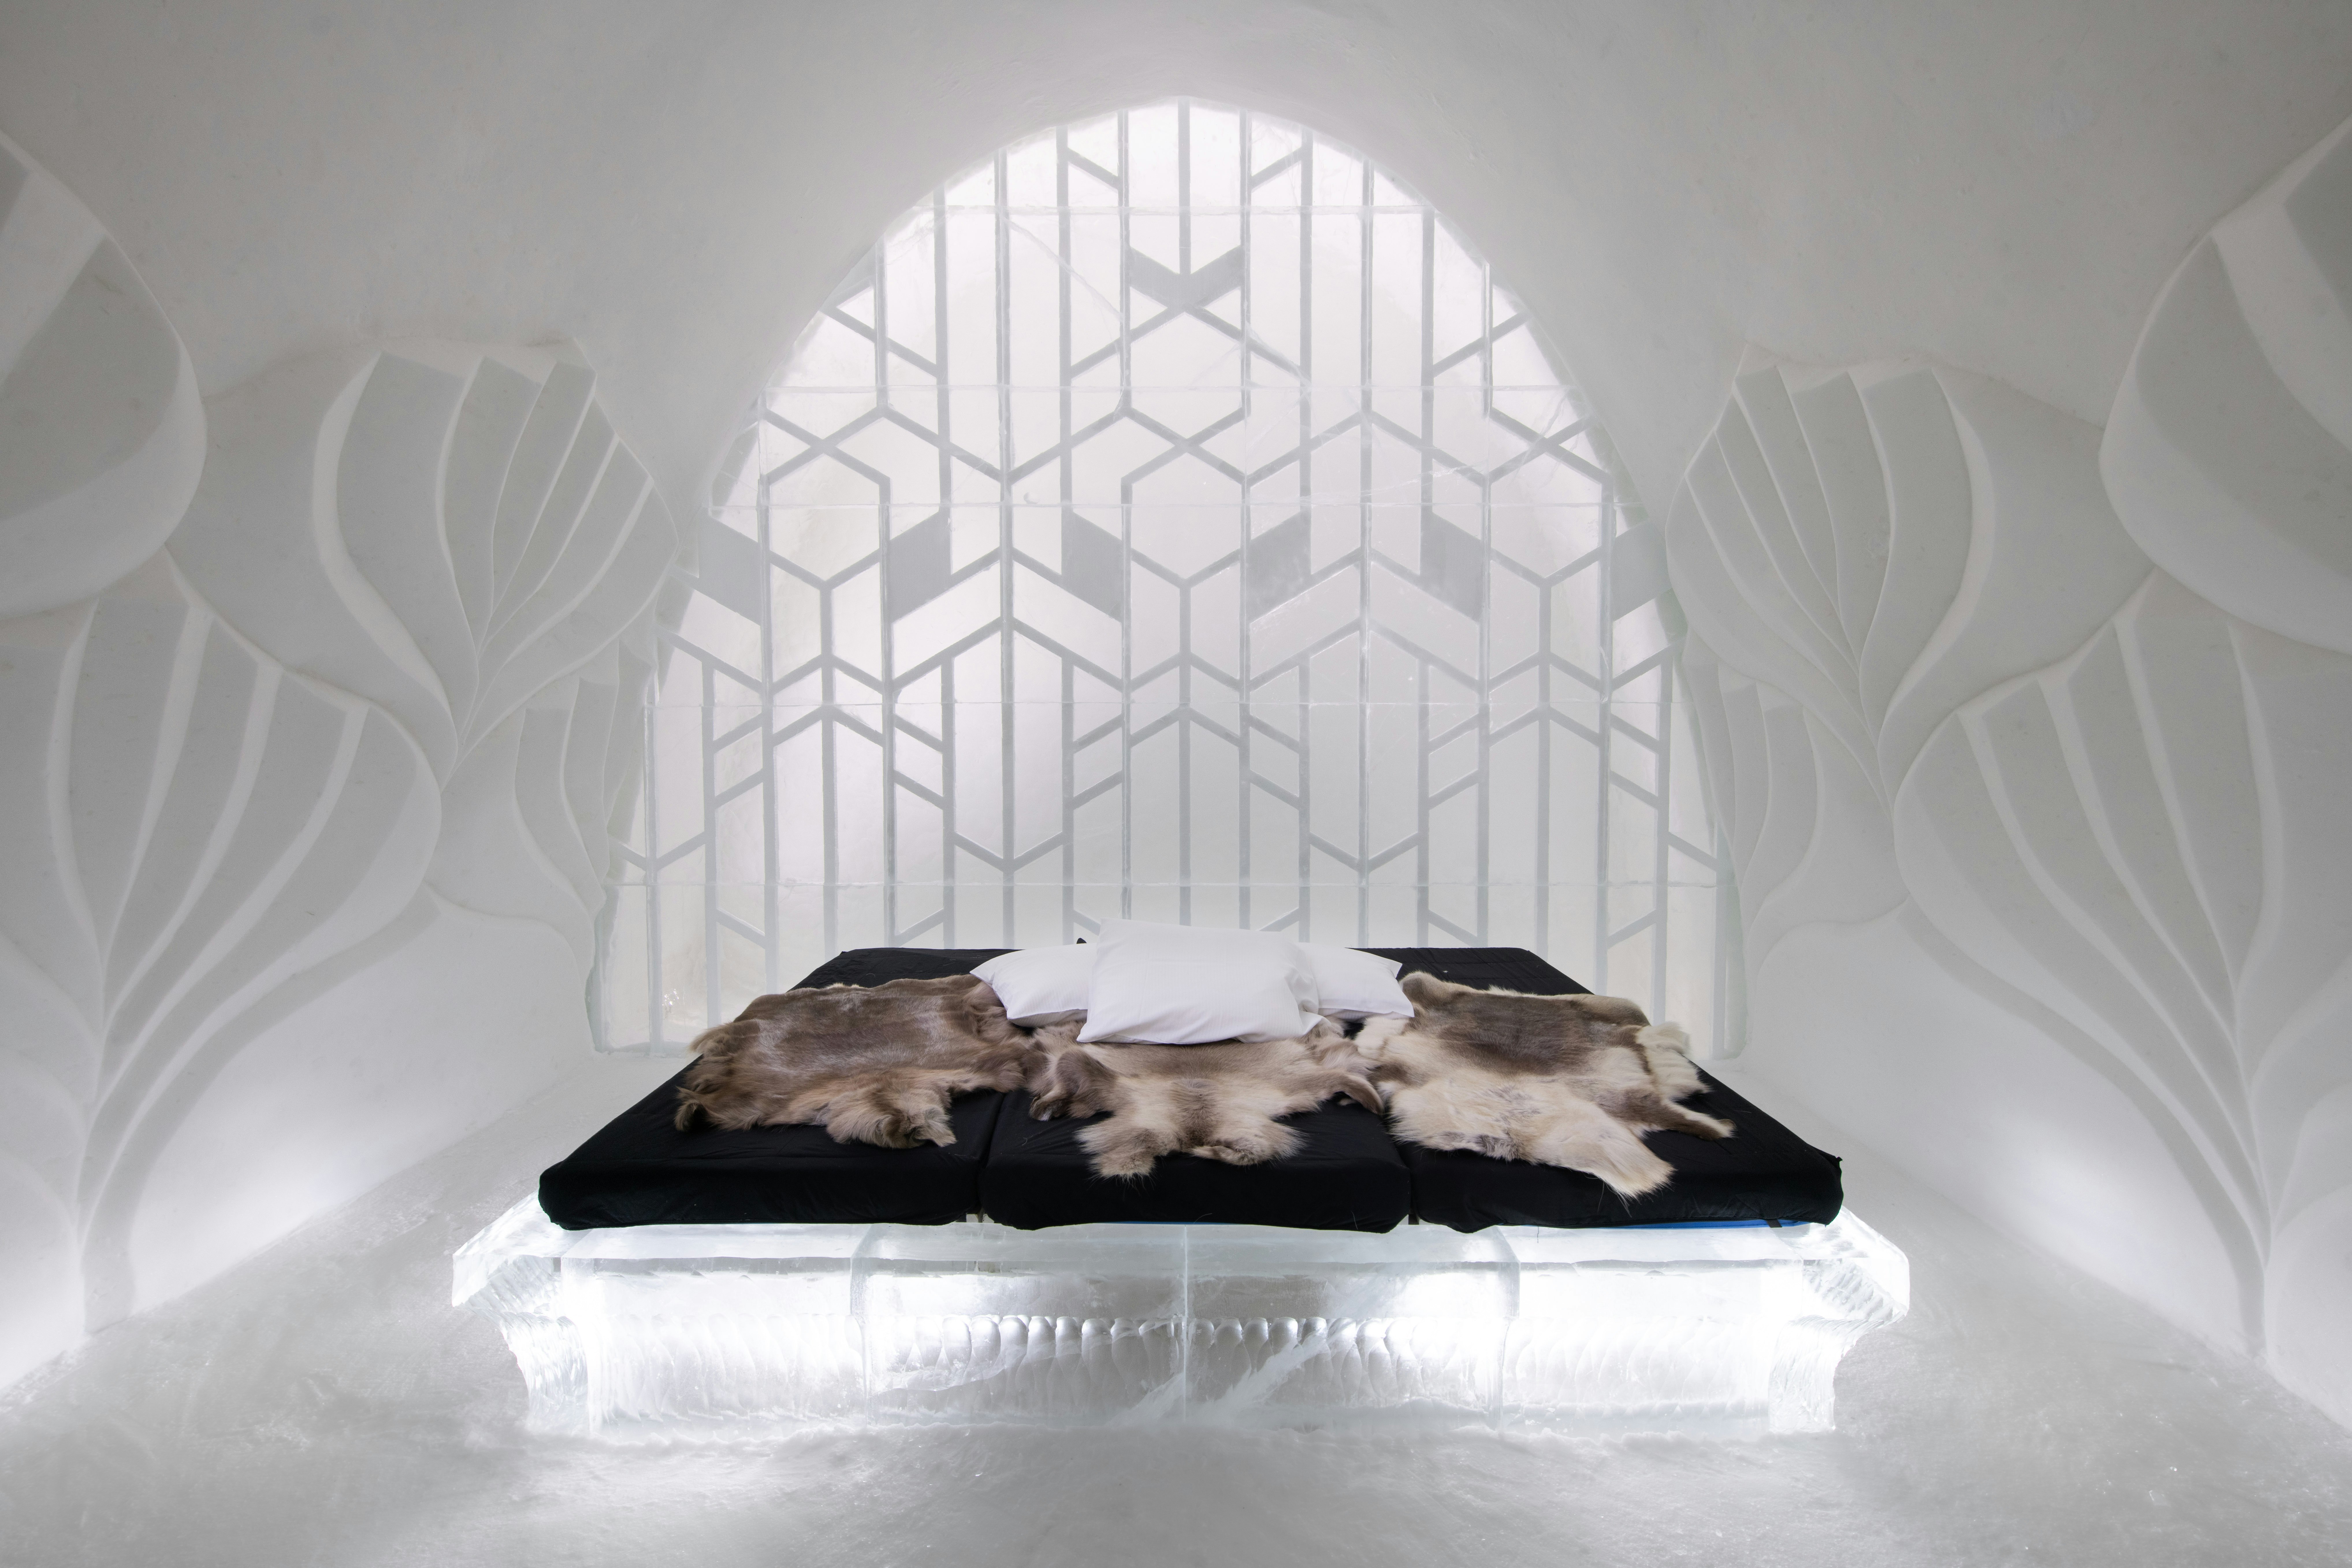 The hexagonal-shaped Great Gatsby-style suite of this year's Icehotel